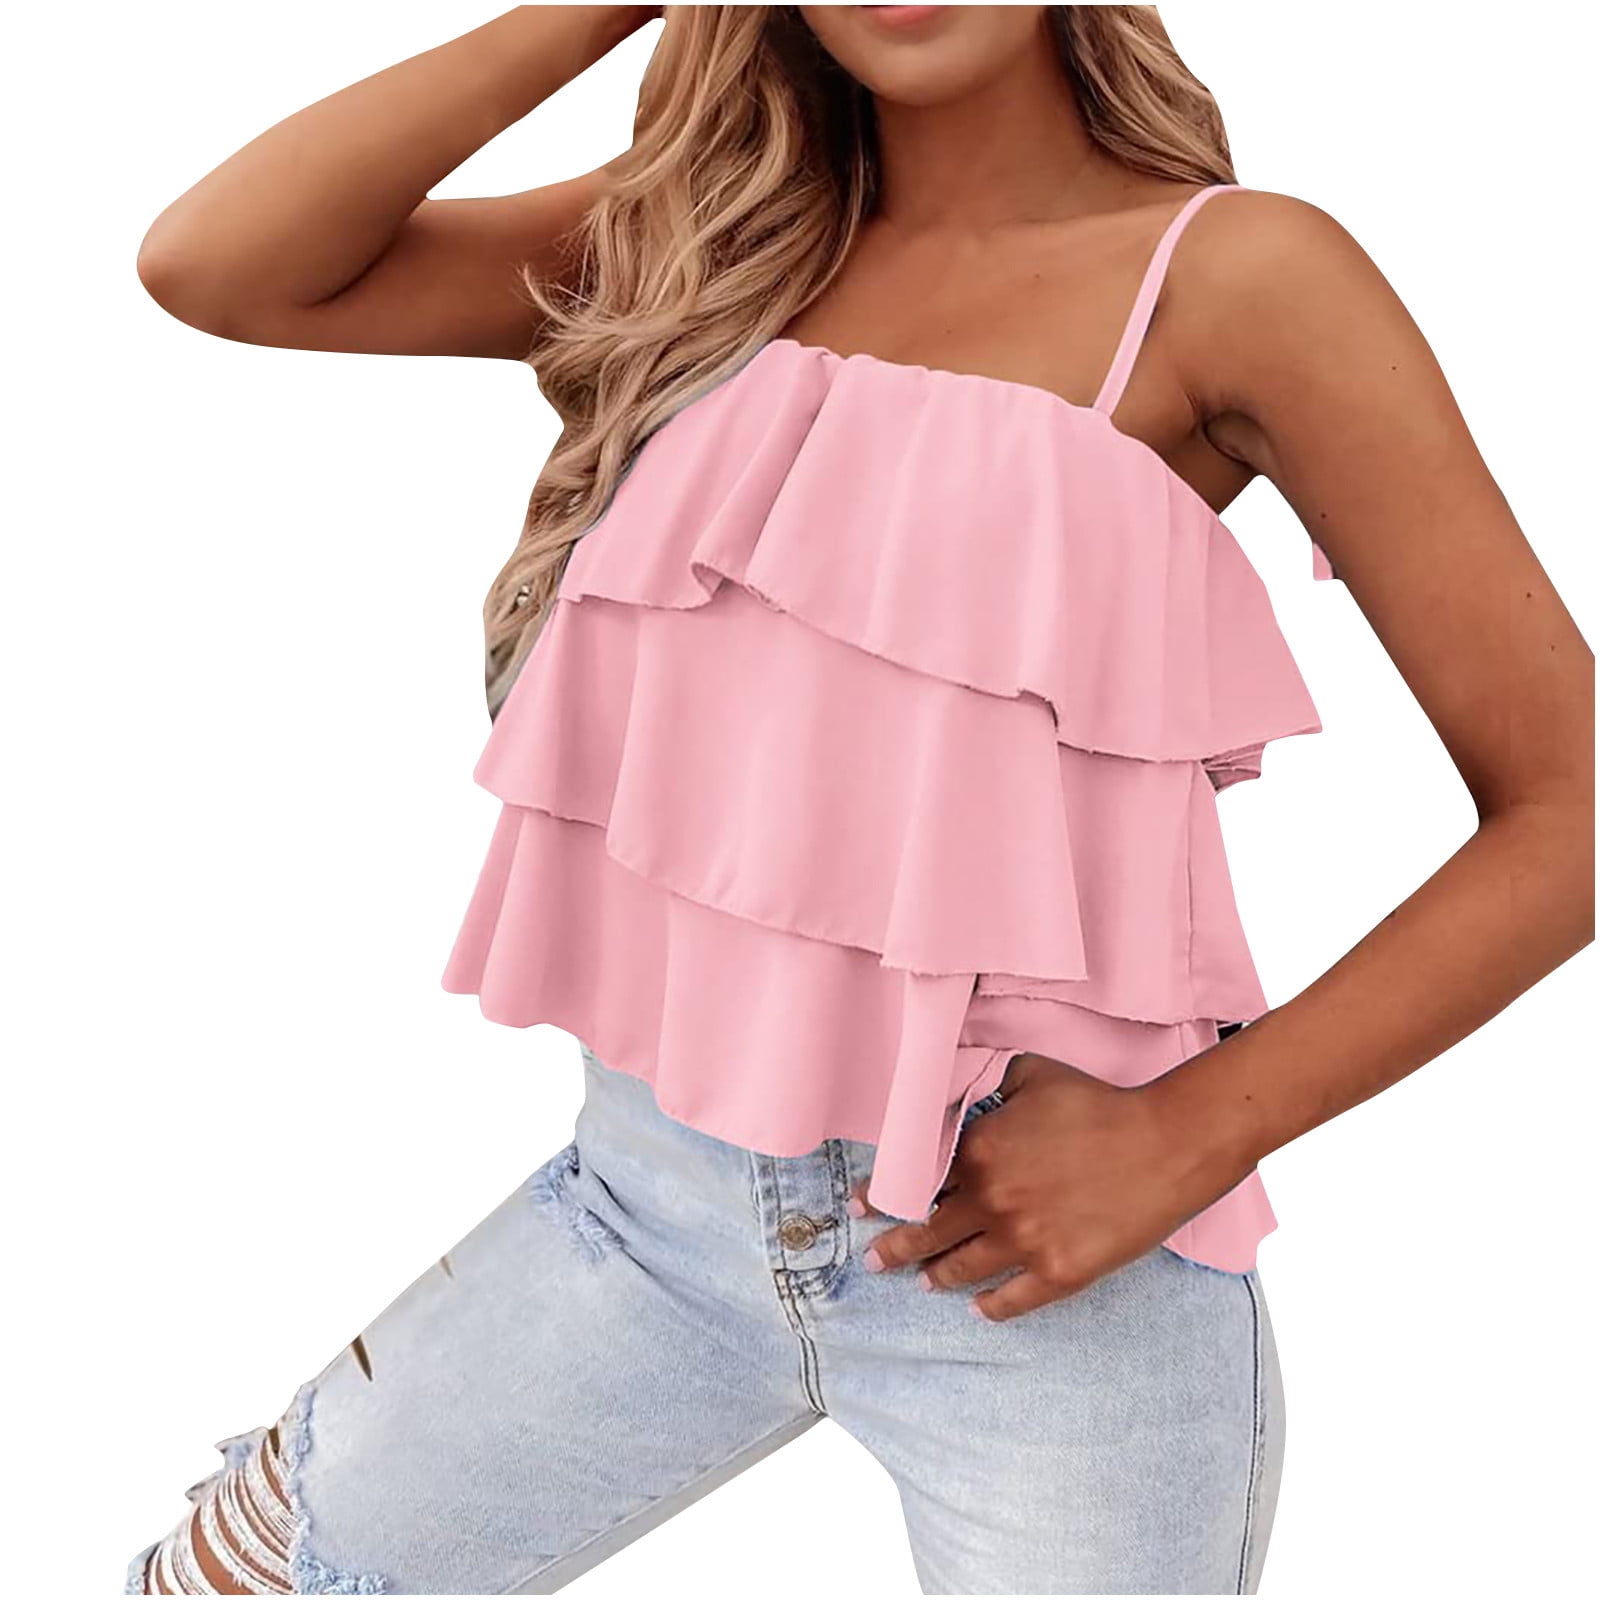 Summer Hot Sale Women Sexy Tank Tops Ruffle Letter Print Camis 2020 Fashion  Casual Beach Club Party